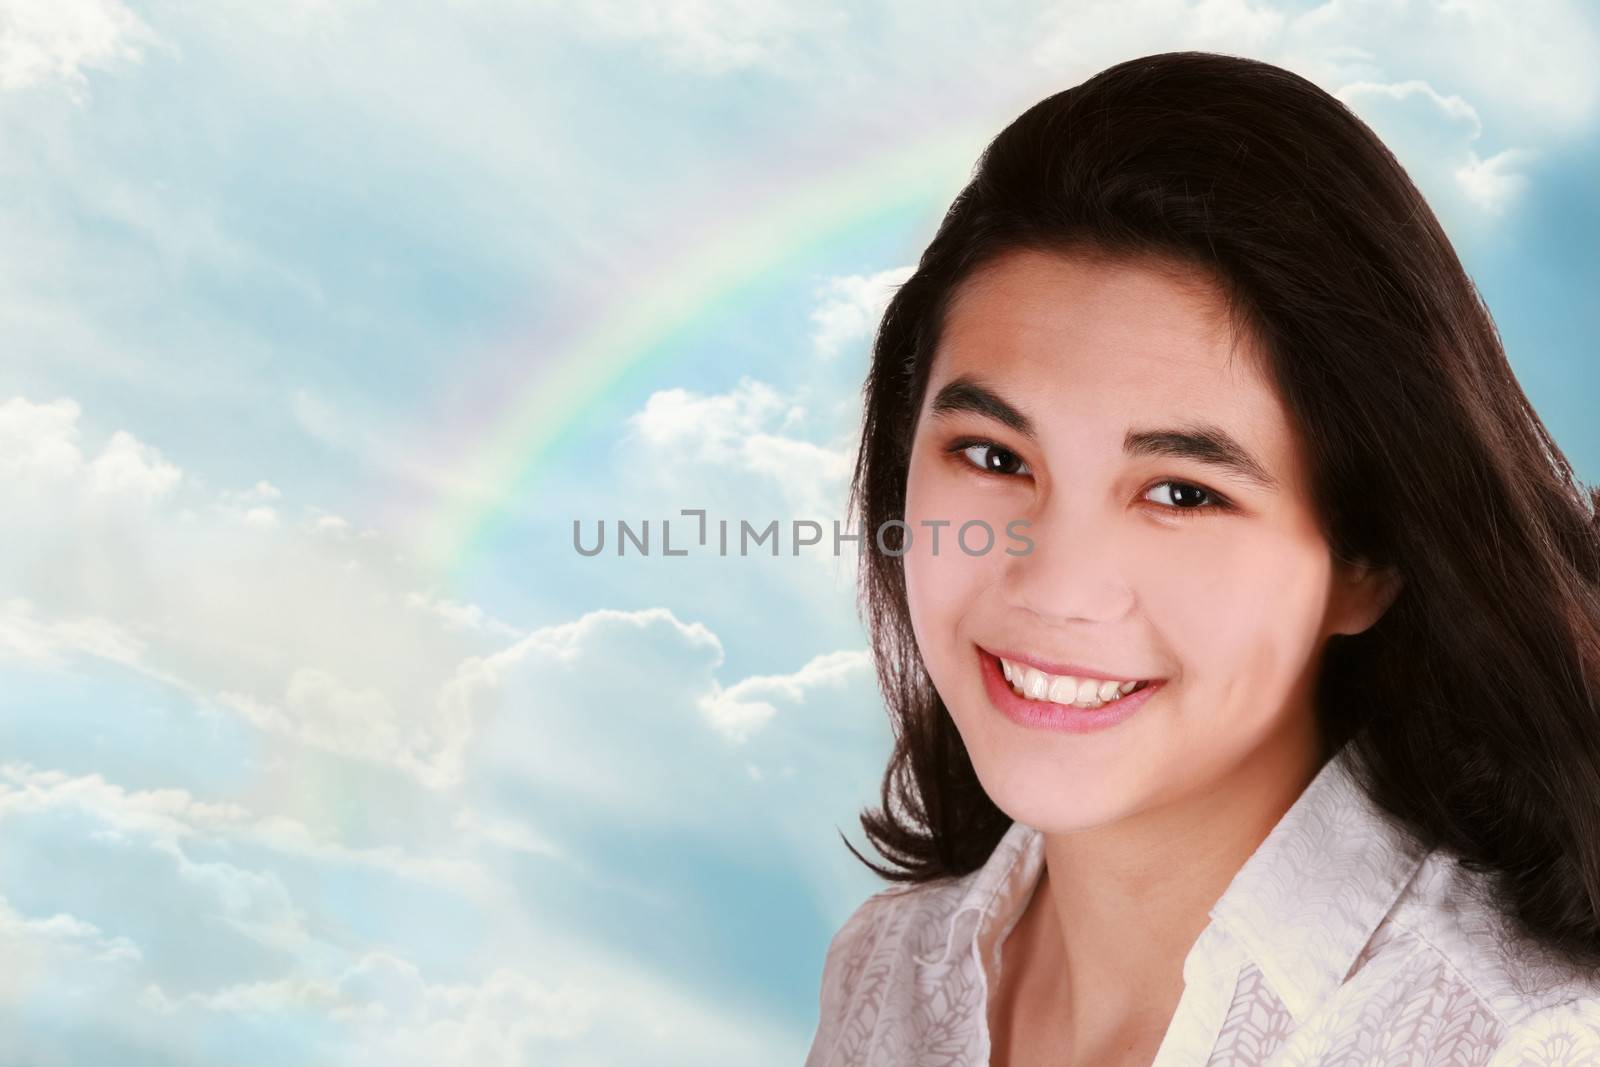 Teen girl against Beautiful clouds in blue sky with rainbow